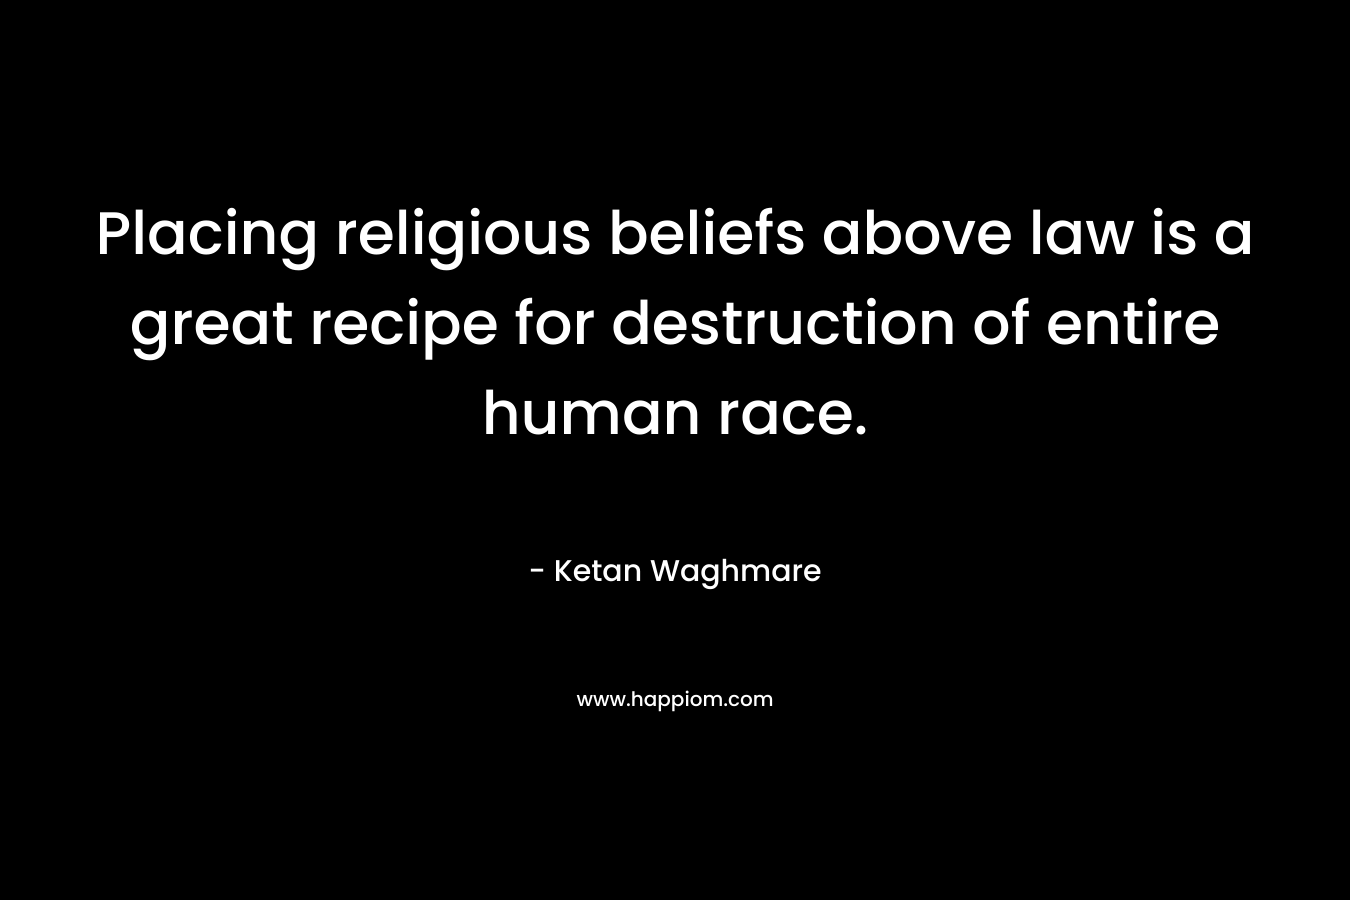 Placing religious beliefs above law is a great recipe for destruction of entire human race.